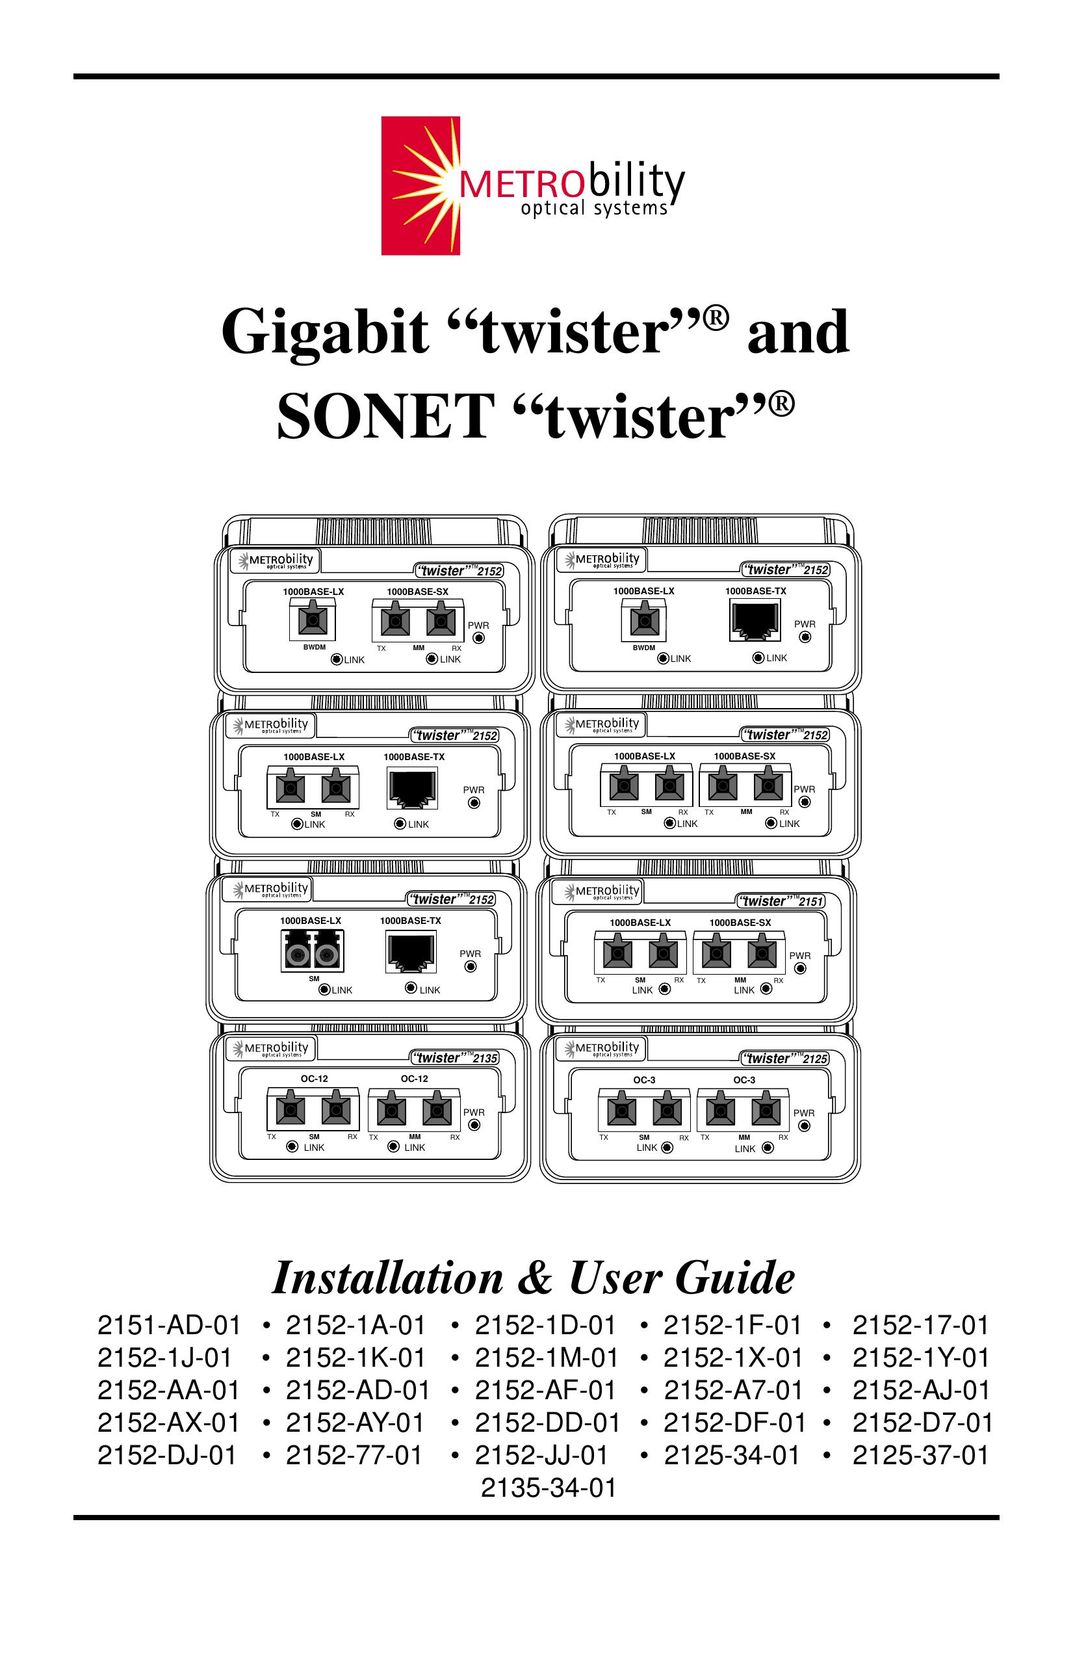 METRObility Optical Systems Gigabit "twister" and SONET "twister" Network Cables User Manual